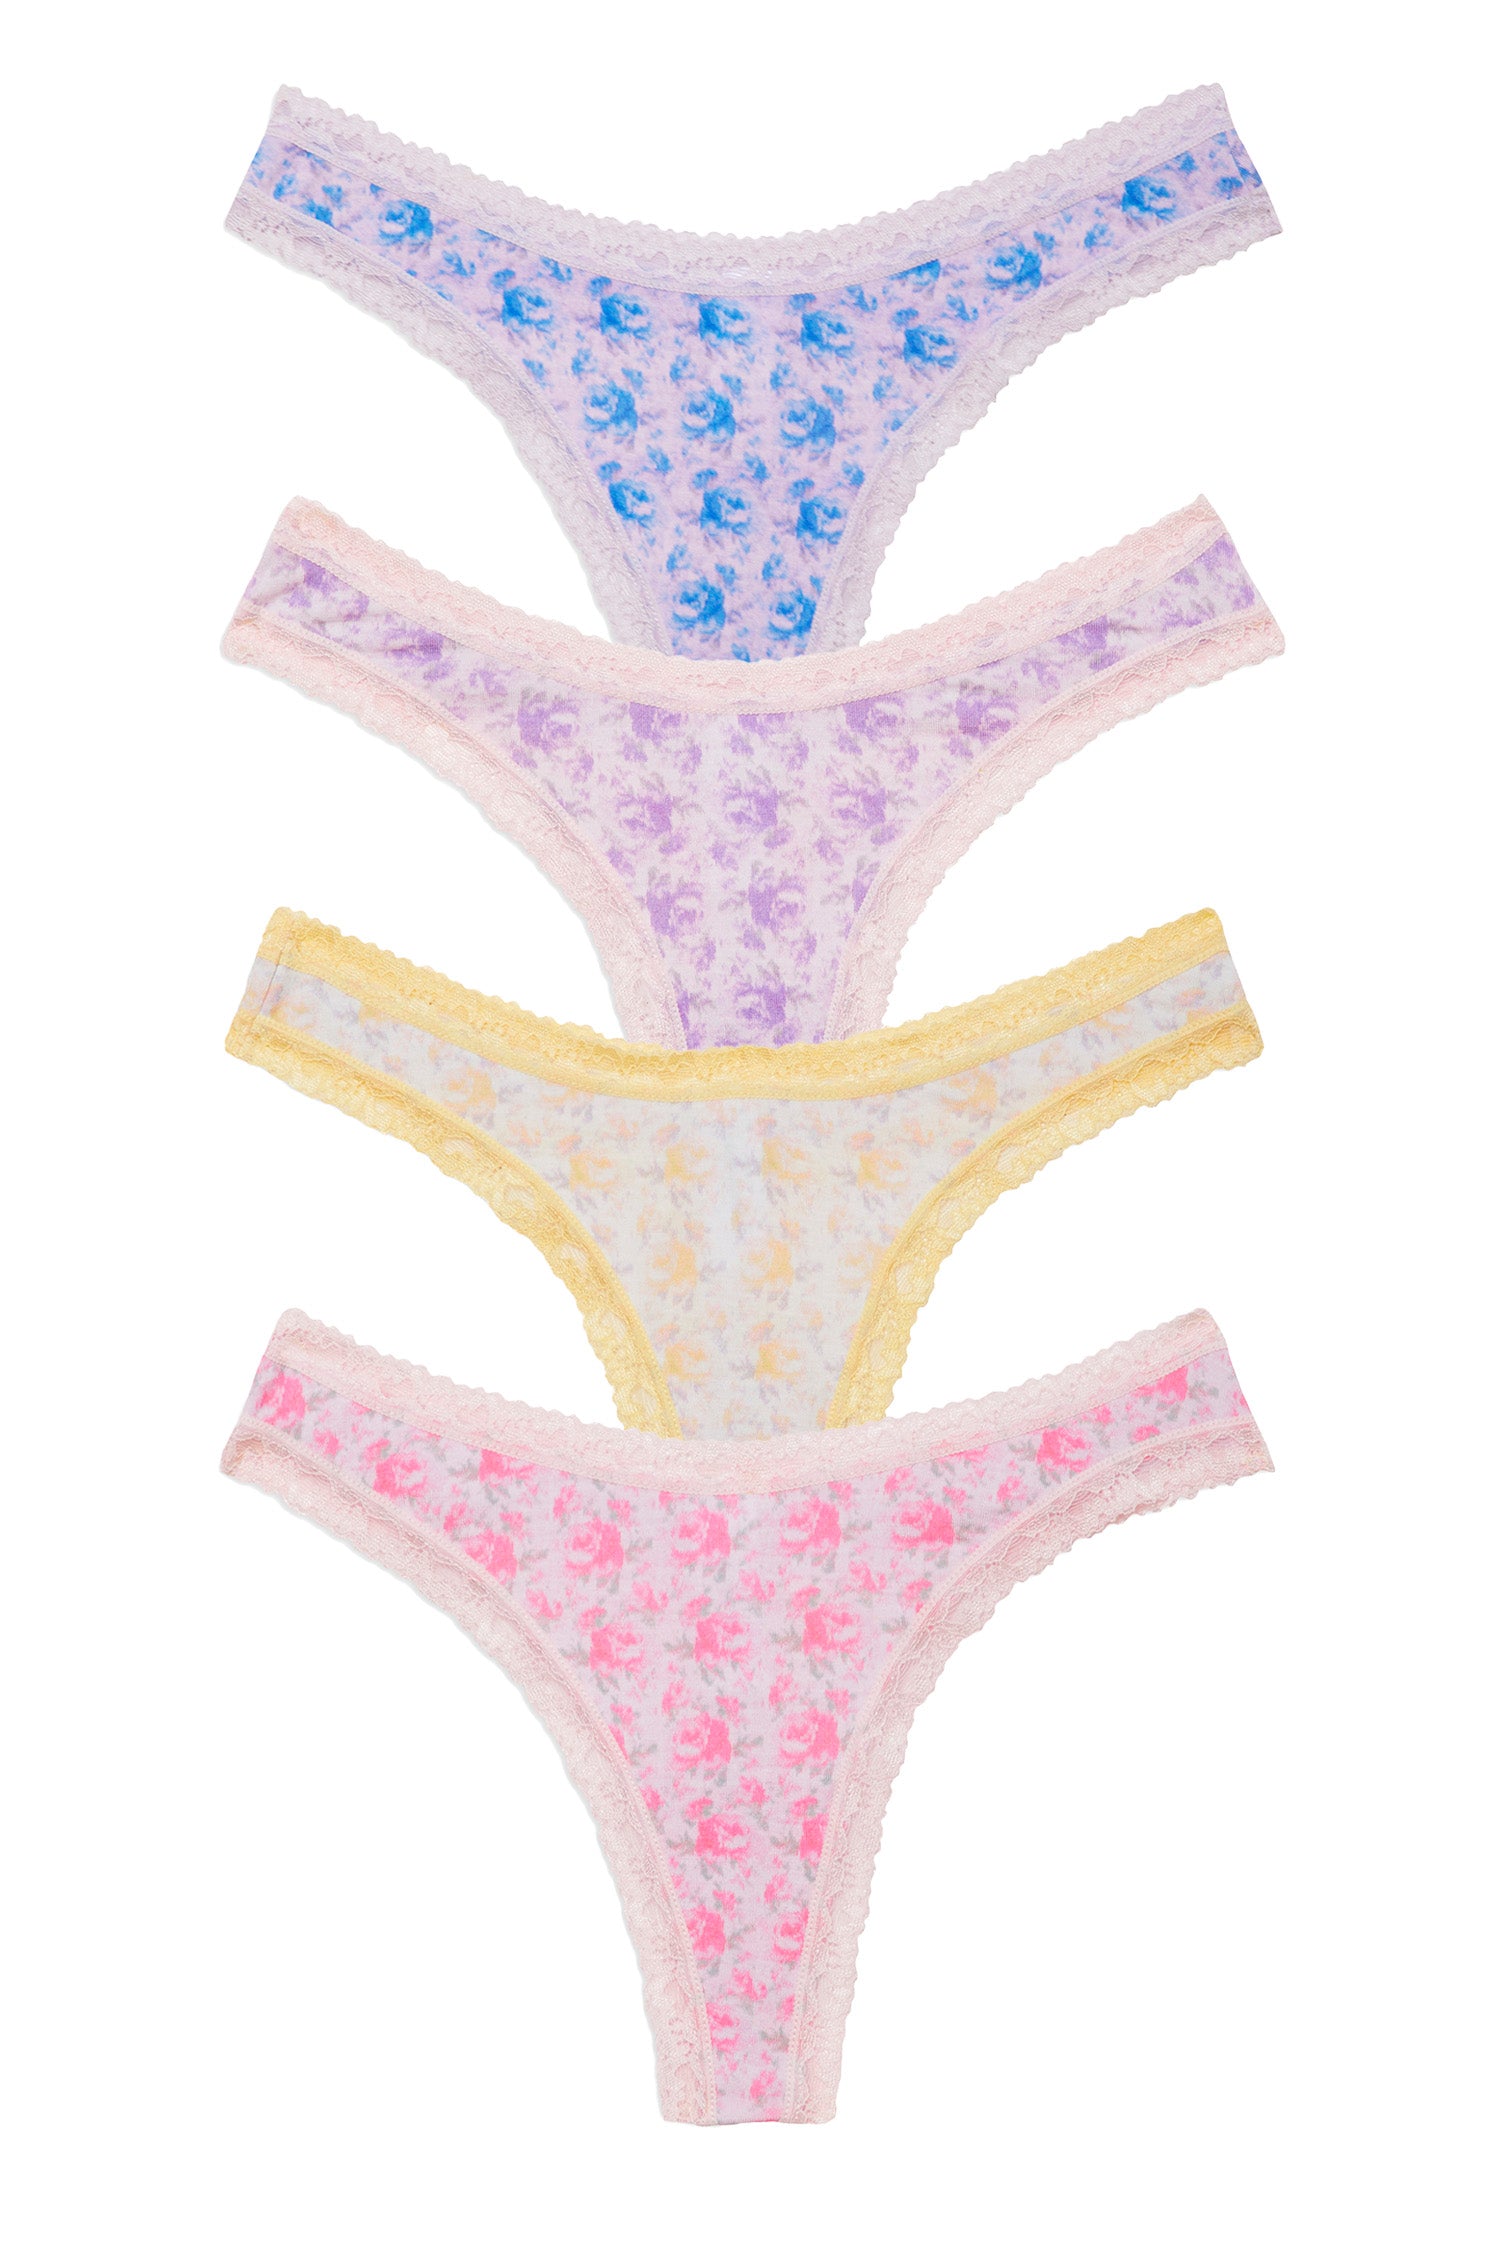 Vibrant floral print thong set in soft cotton with lace trim